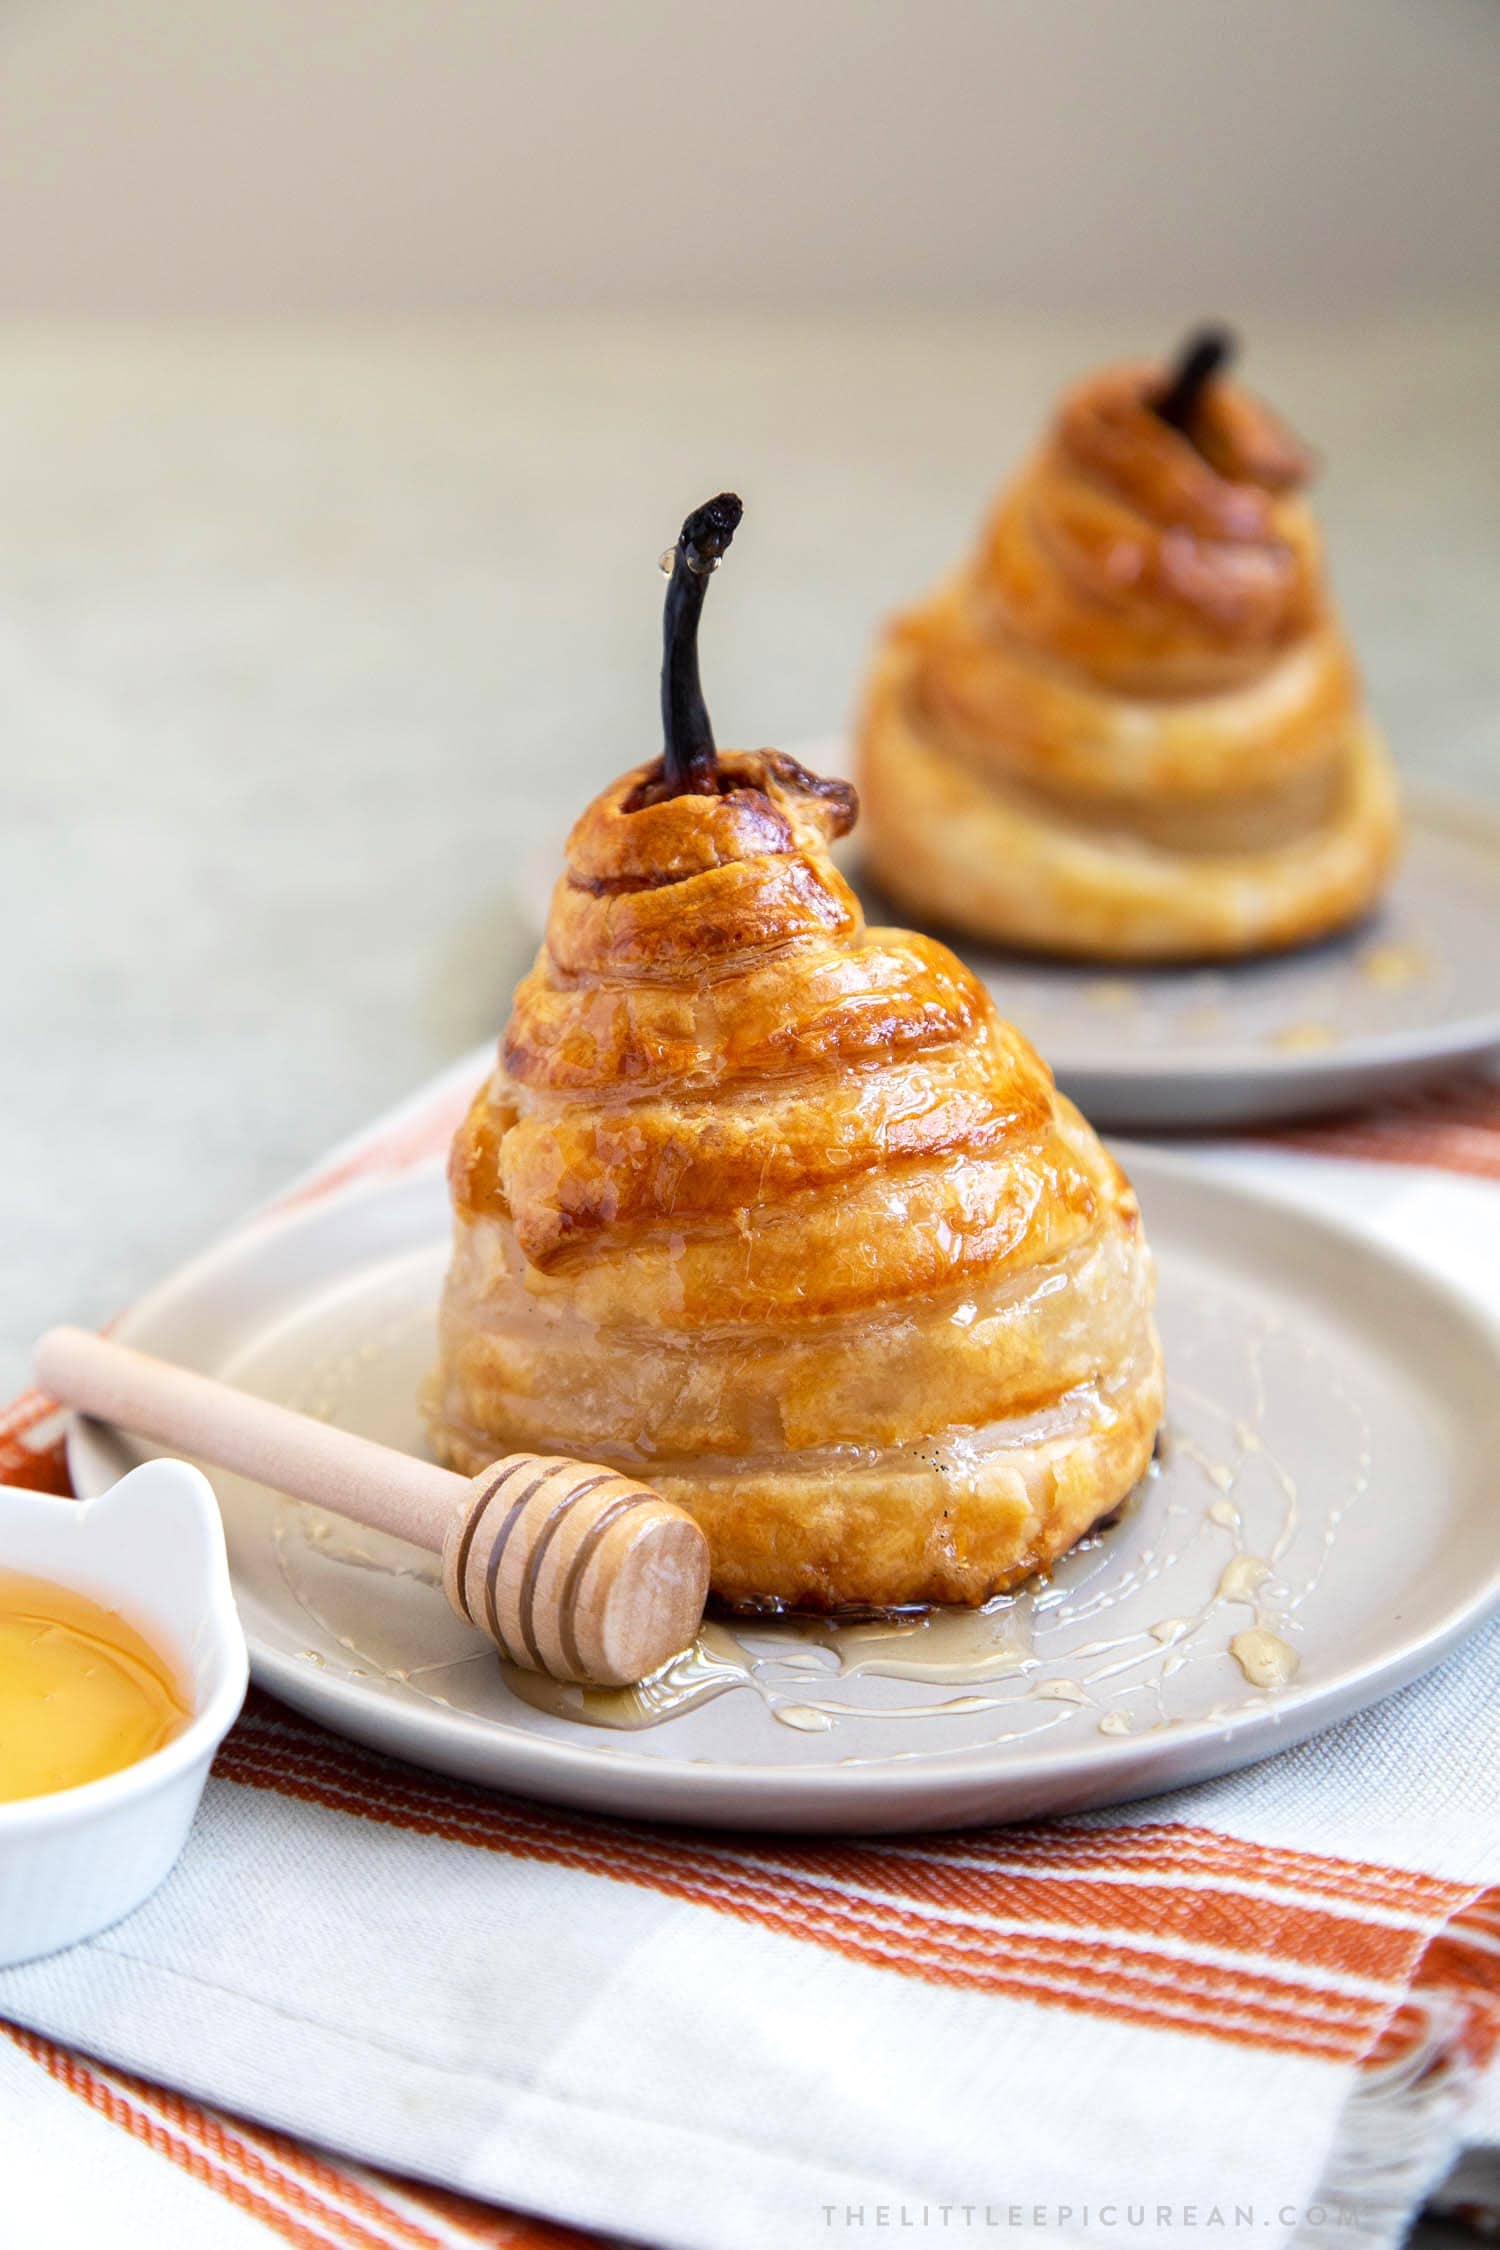 Poached Pear Puff Pastry. Pears poached in sweet vanilla cinnamon liquid. Encased in puff pastry and baked until golden. #pear #peardessert #falldessert #puffpastry